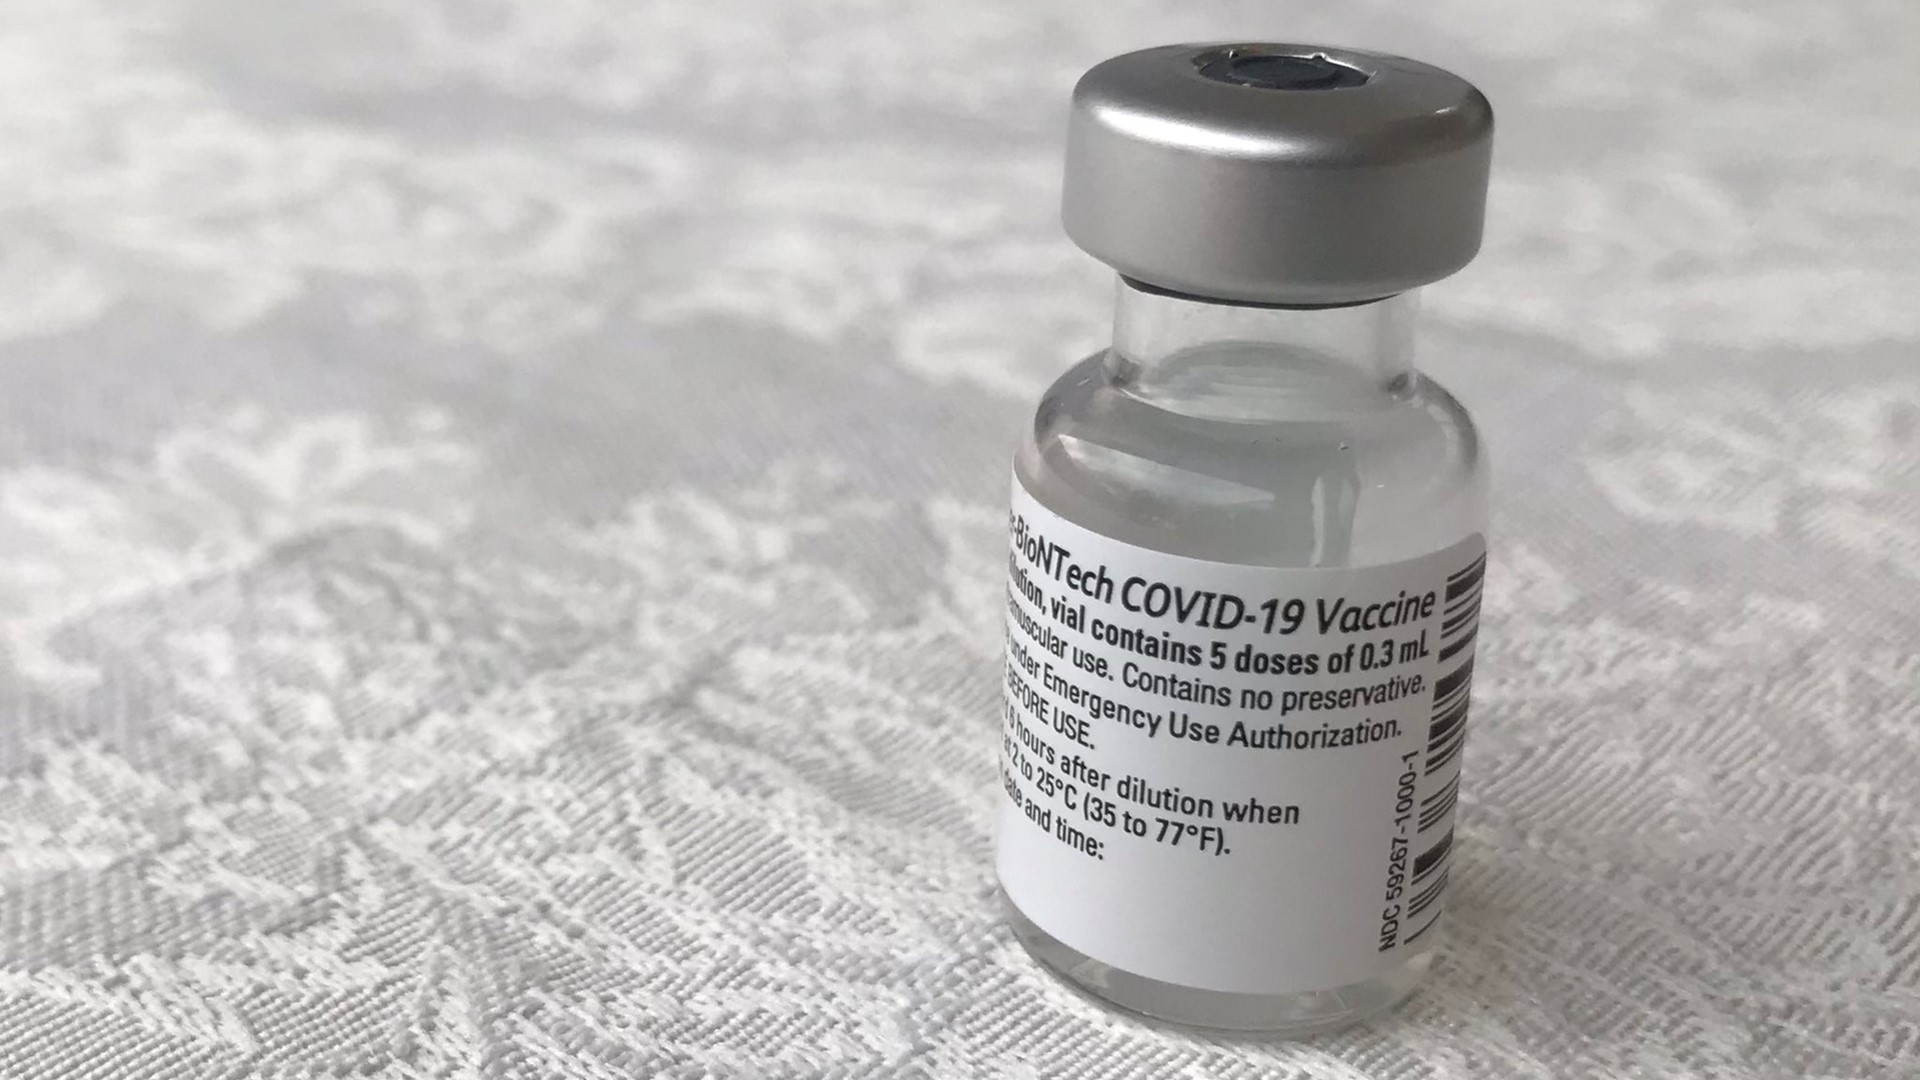 The FDA has approved emergency use of the Pfizer COVID vaccine for children aged 12-15. The CDC will be meeting to discuss approval as well.